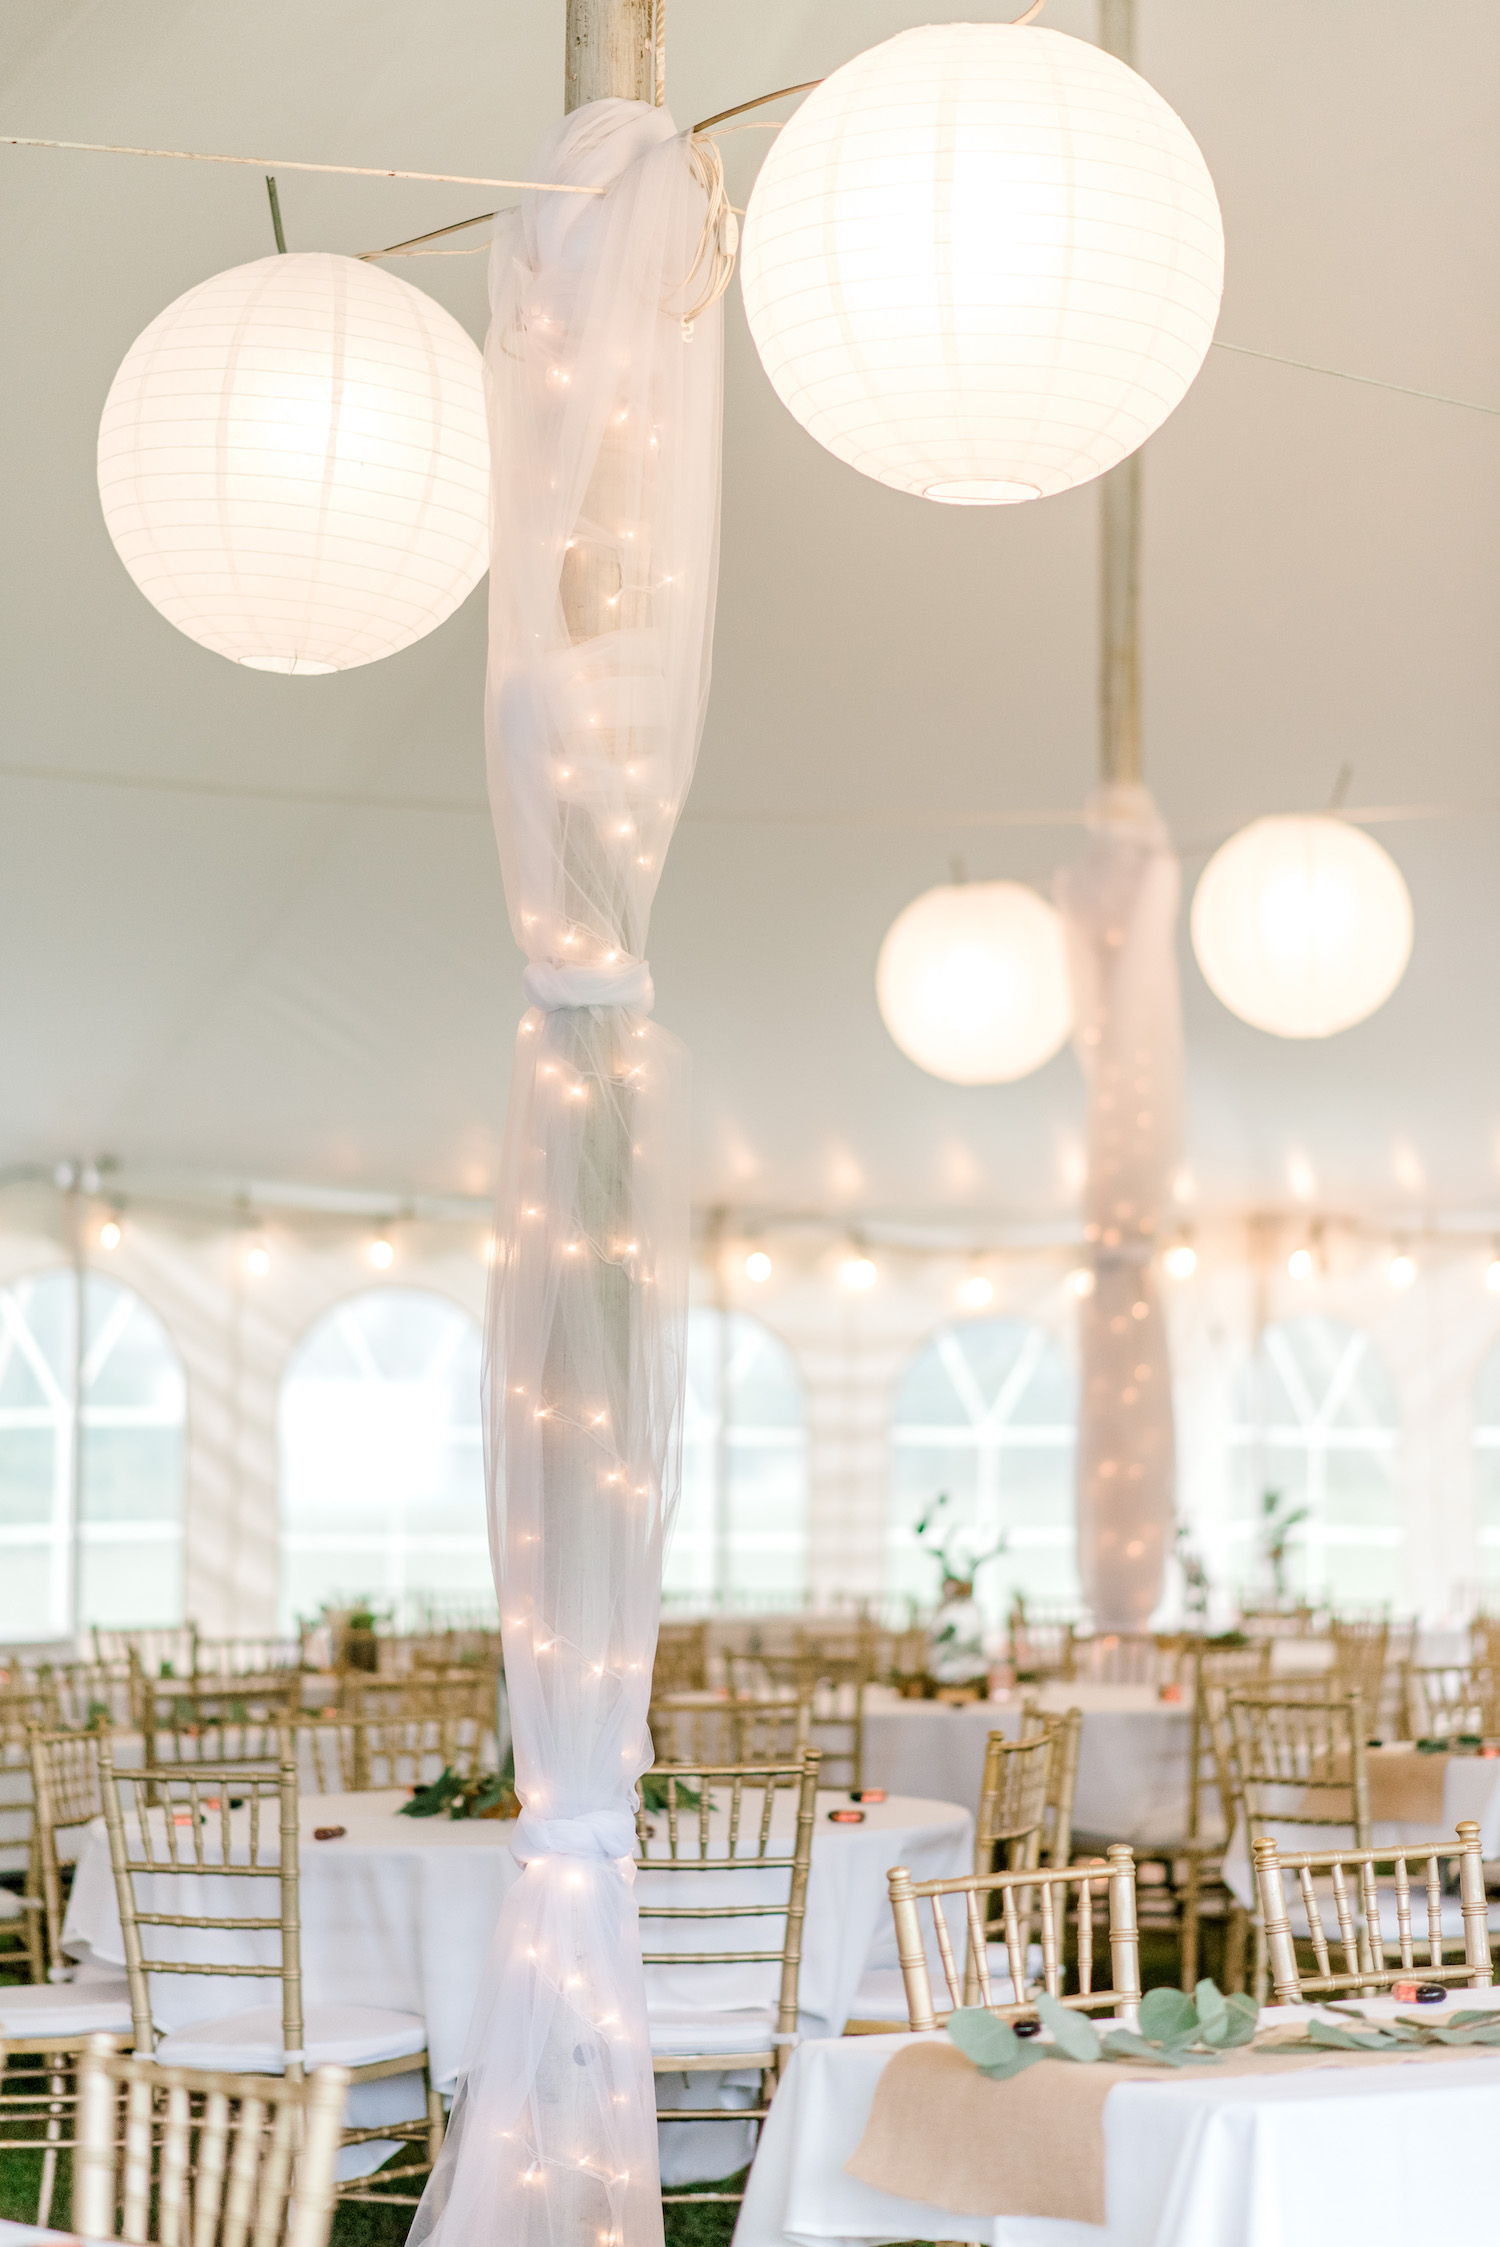 Decor under tent for Wallinwood Springs Golf Course wedding